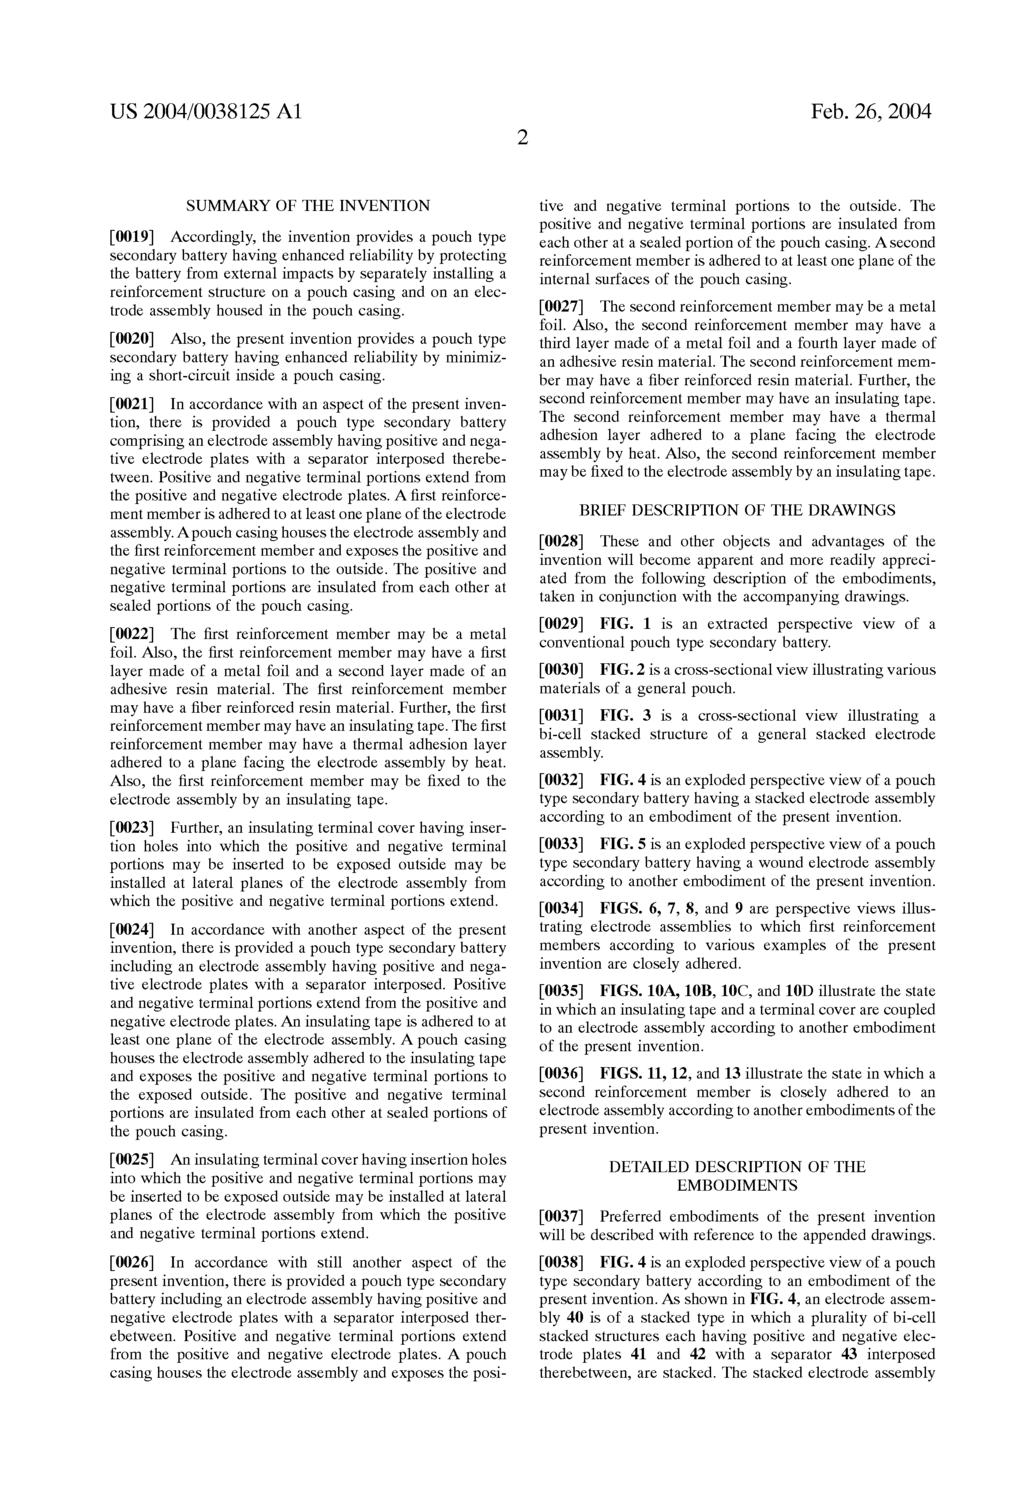 US 2004/0038.125 A1 Feb. 26, 2004 SUMMARY OF THE INVENTION 0.